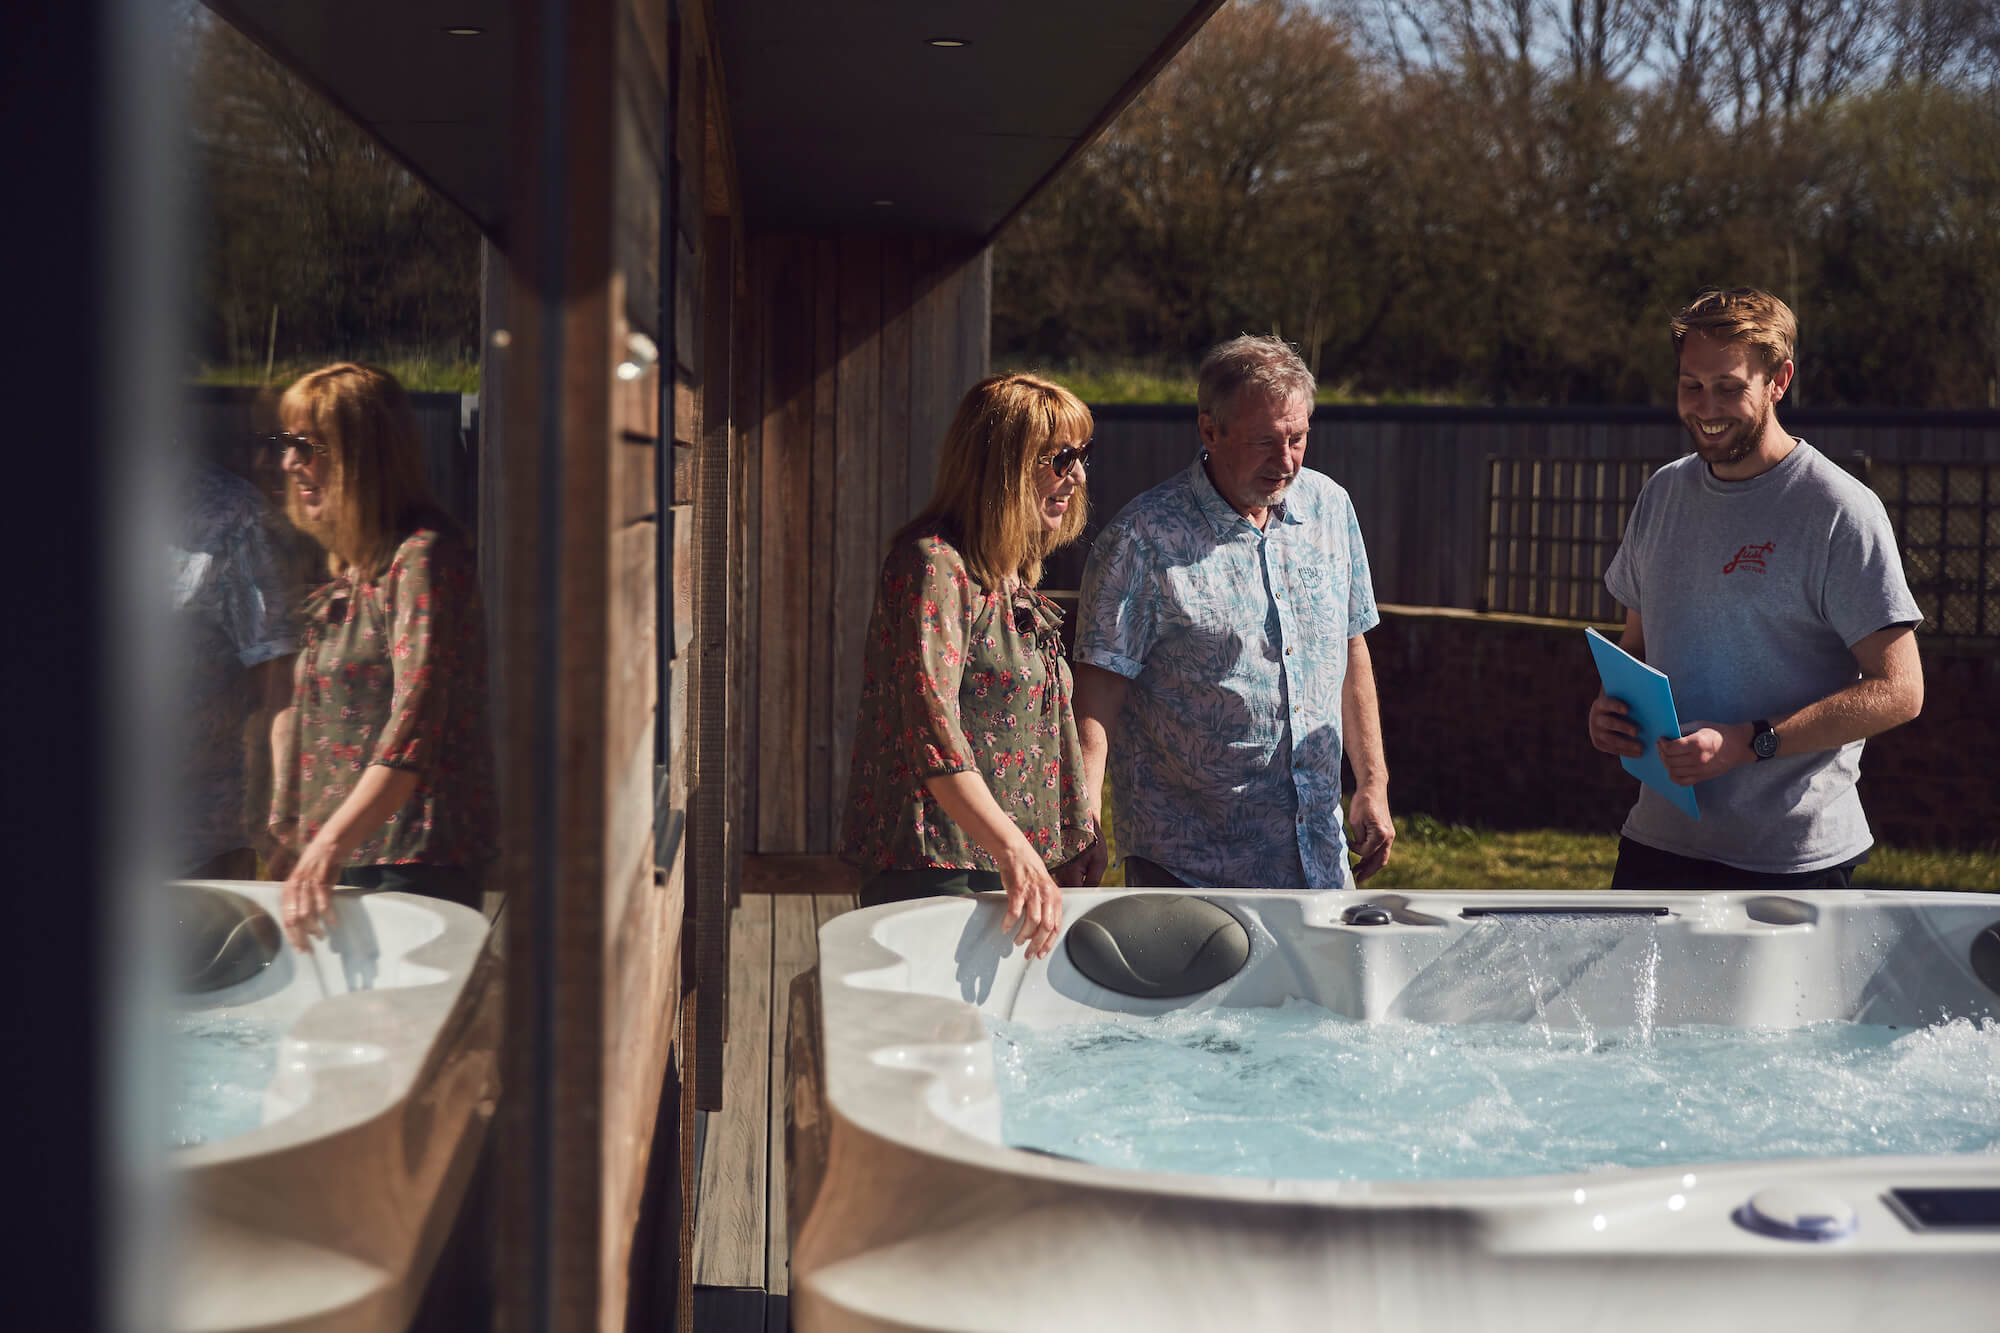 A hot tub buyers guide | Just Hot Tubs